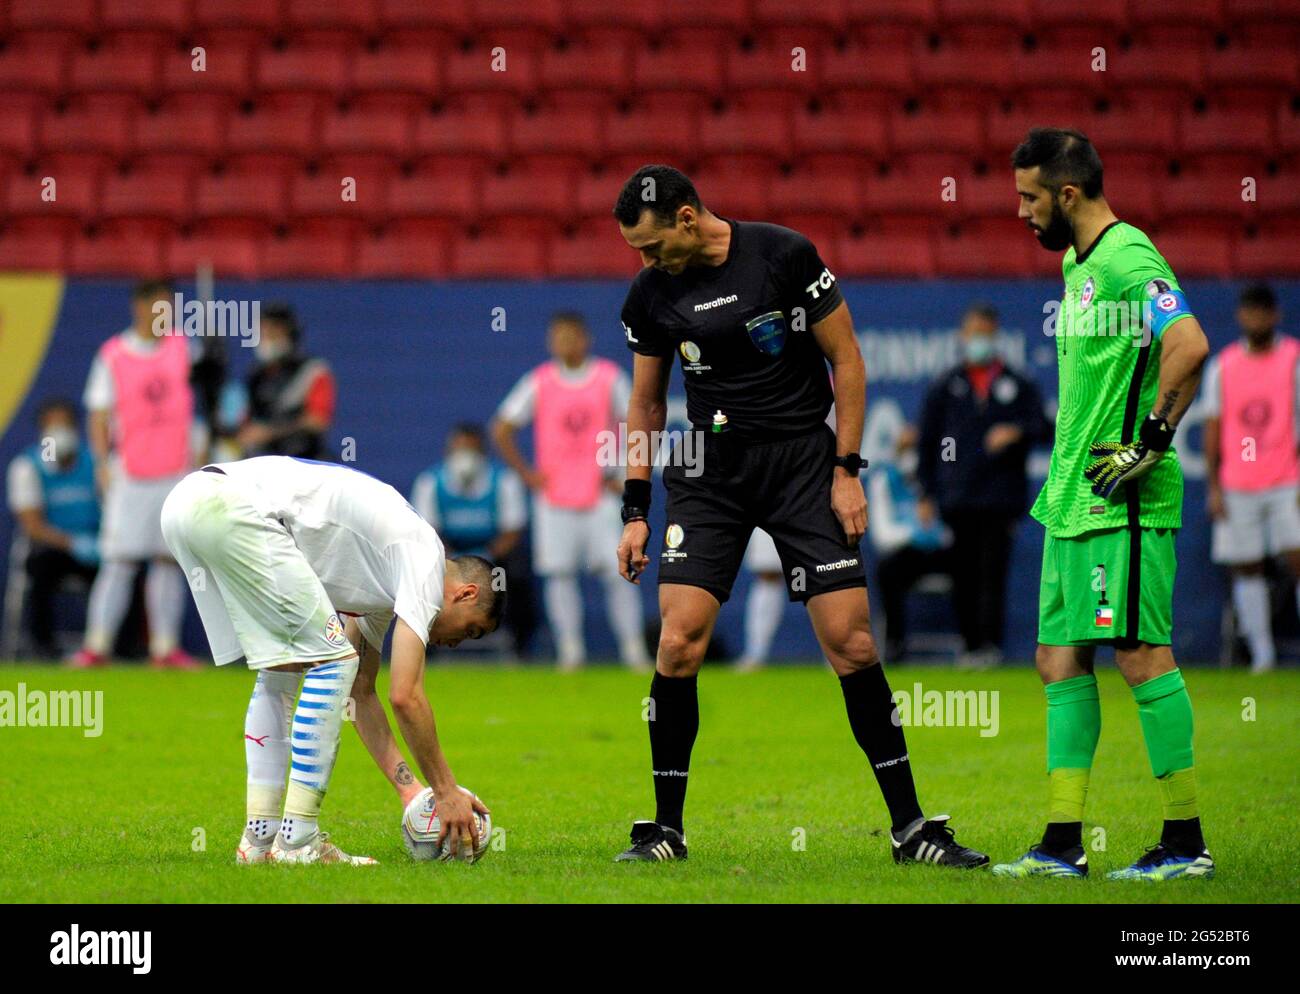 BRASILIA, BRAZIL - JUNE 24: Miguel Almiron of Paraguay prepares for the penalty kick observed by the referee Wimar Roldan and the Chilean goalkeeper Claudio Bravo ,during the match between Chile and Paraguay as part of Conmebol Copa America Brazil 2021 at Mane Garrincha Stadium on June 24, 2021 in Brasilia, Brazil. (MB Media) Stock Photo